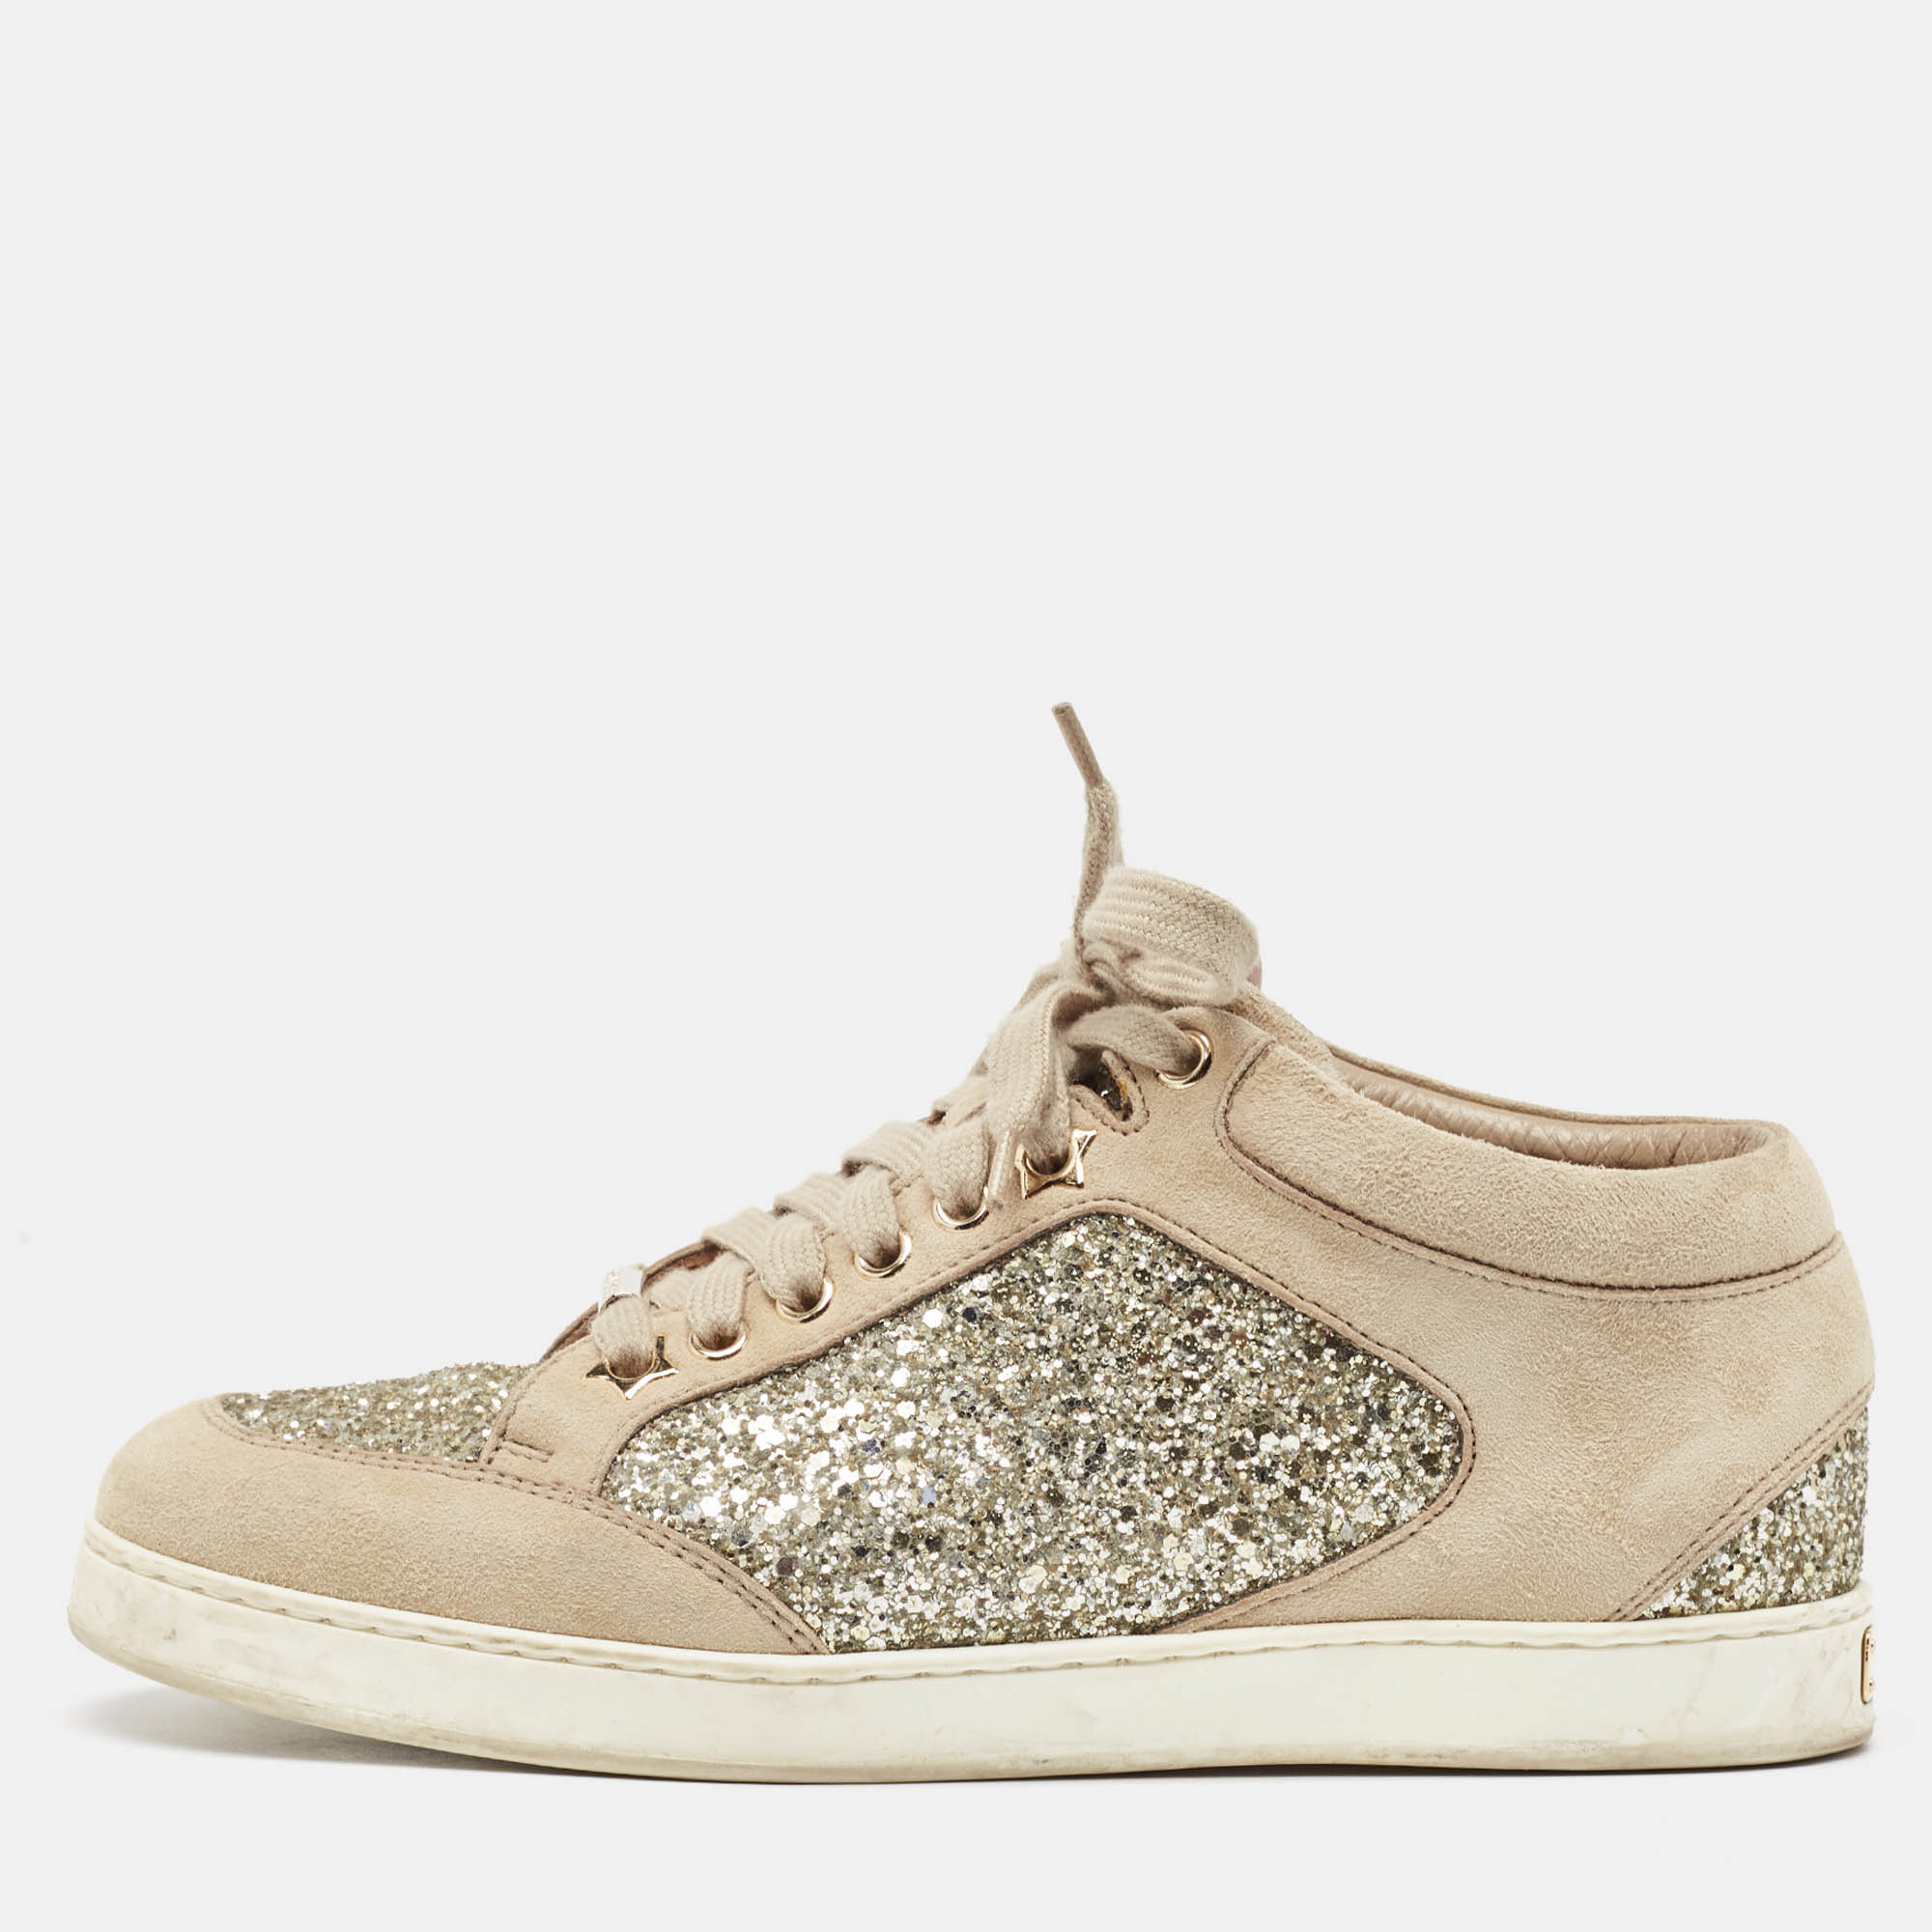 Jimmy choo beige glitter and suede miami sneakers size 36